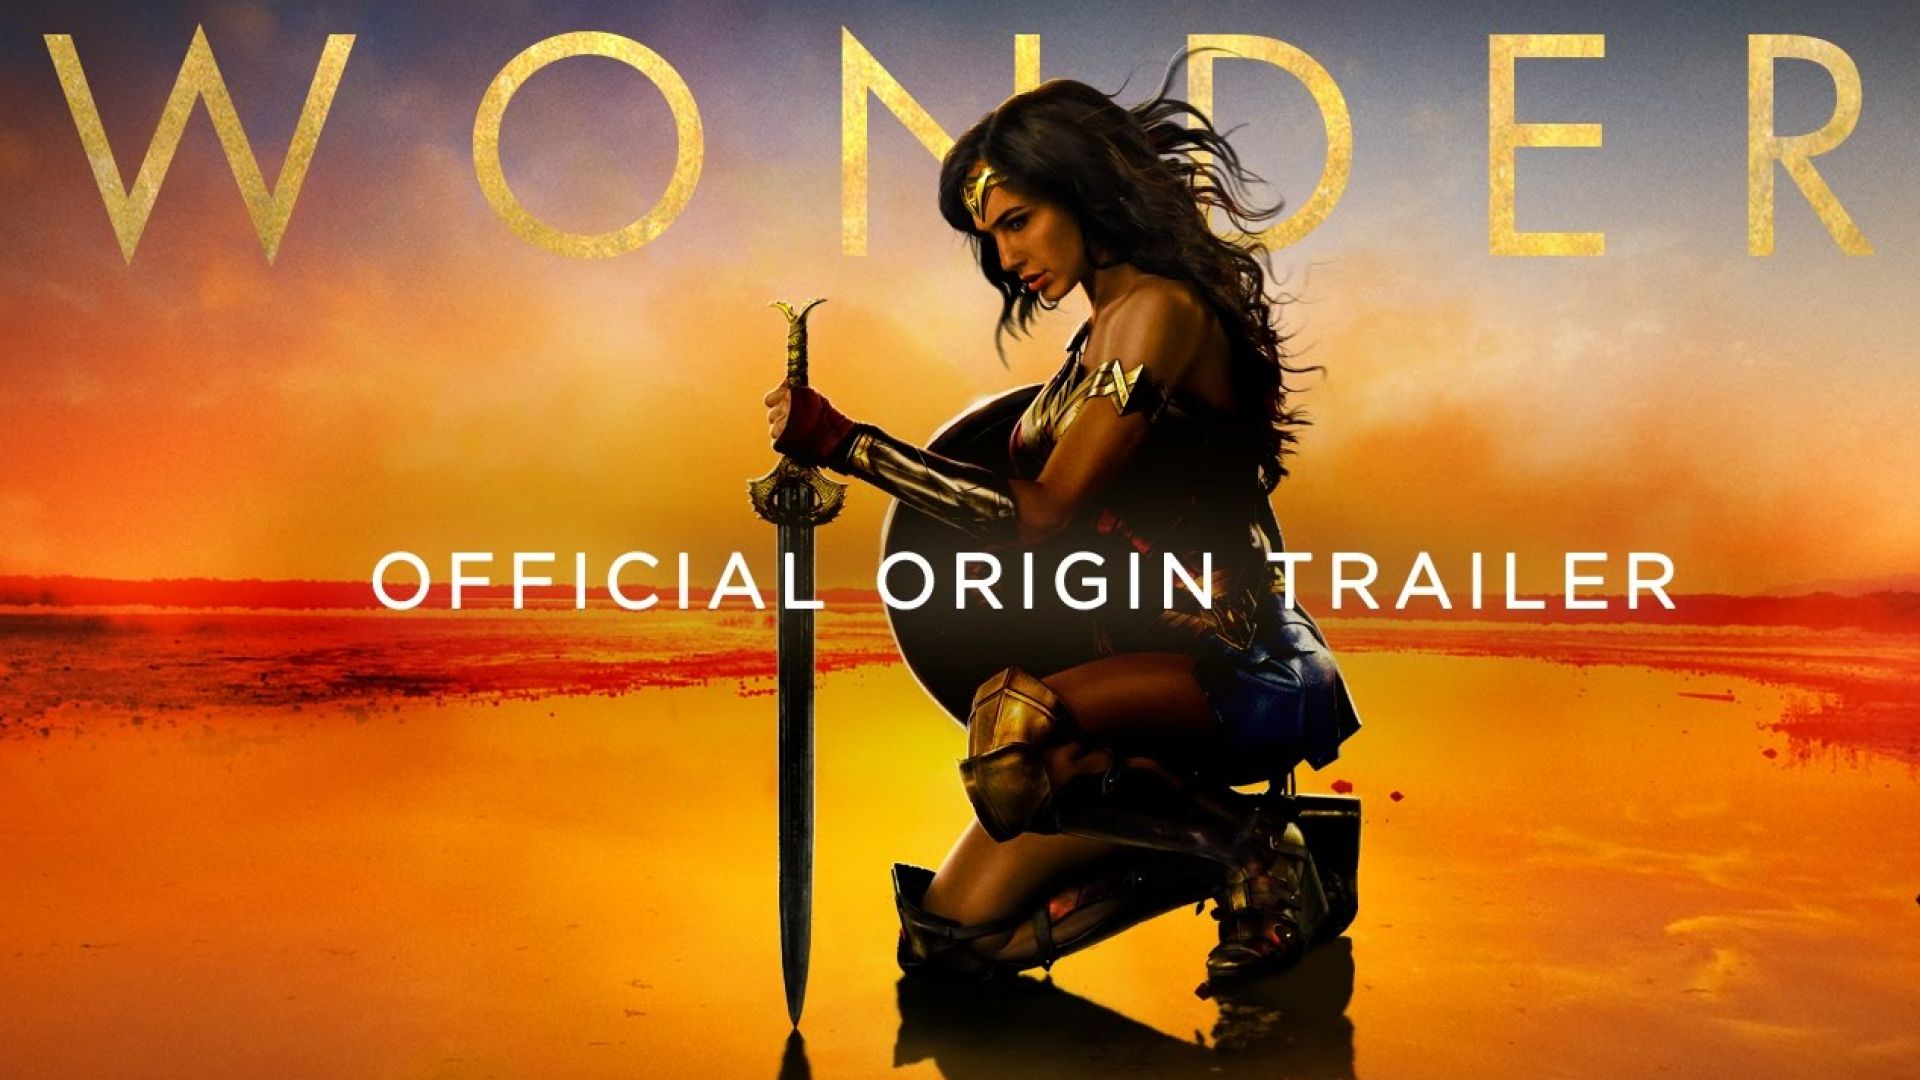 The third trailer for Wonder Woman has landed